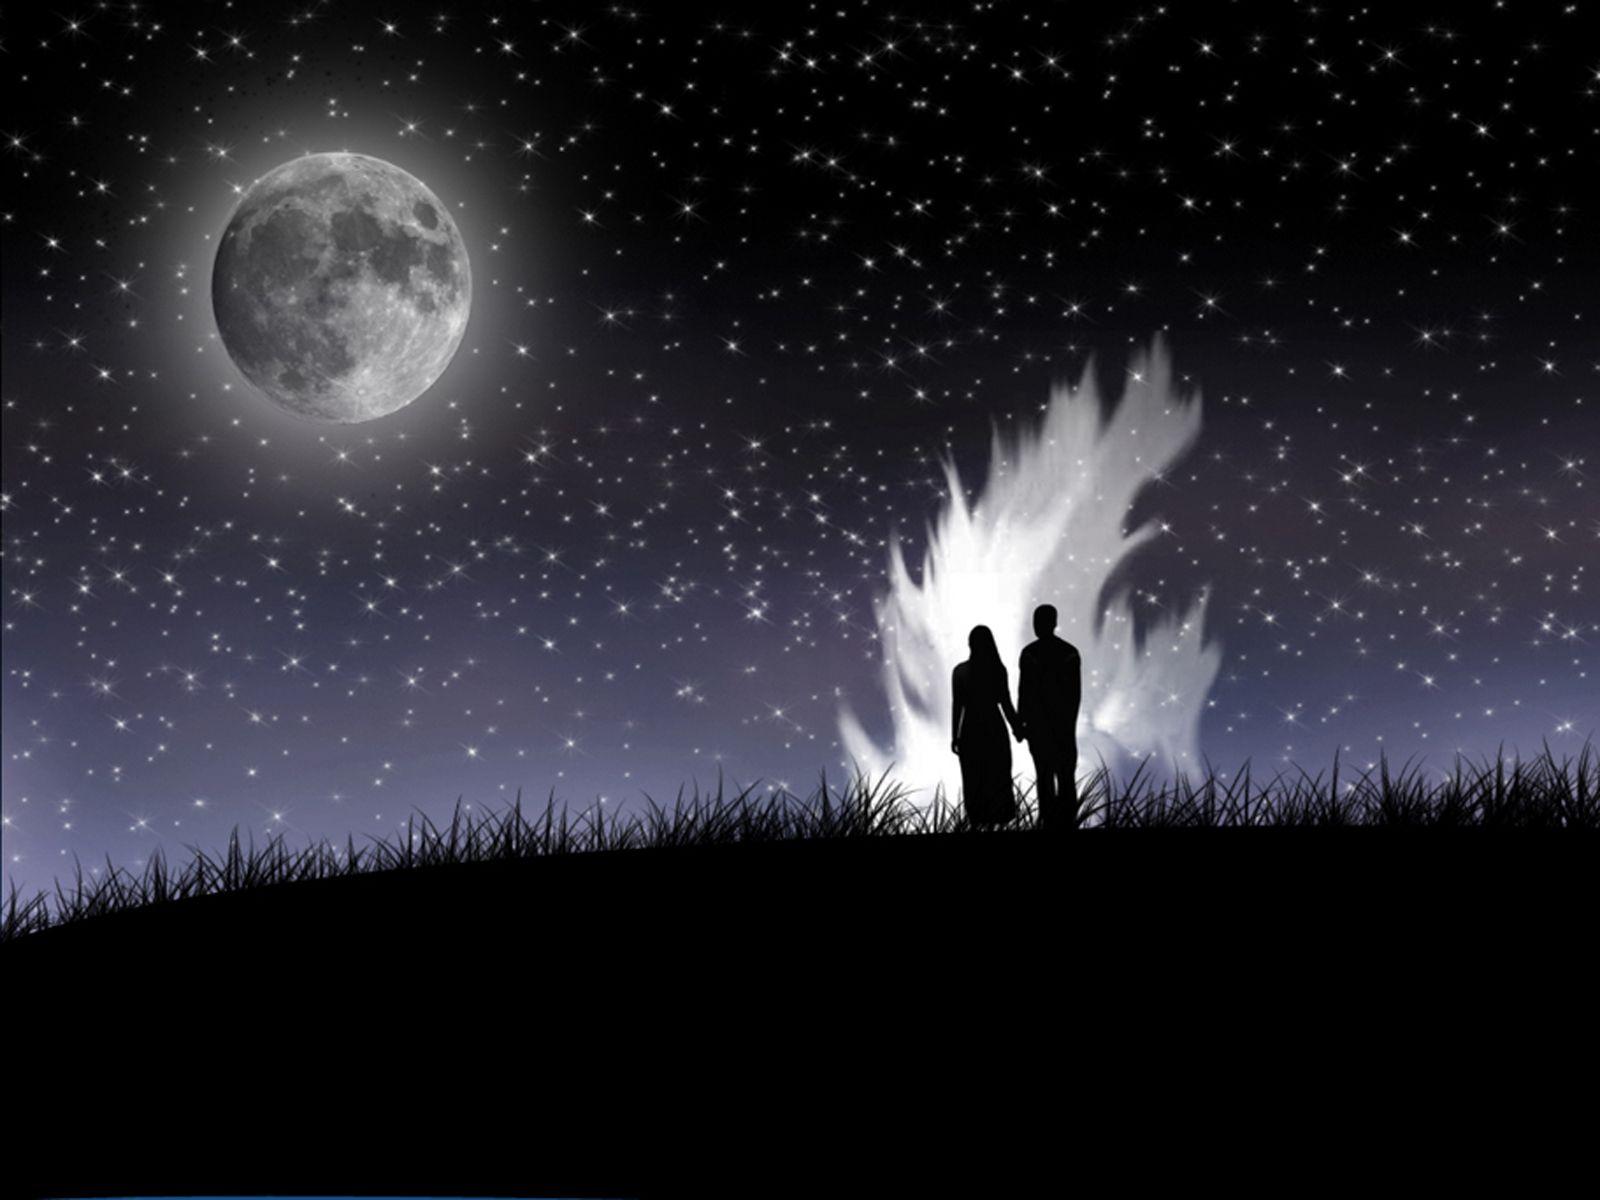 Moon Star couple Animated Wallpaper, Image & Picture. Download